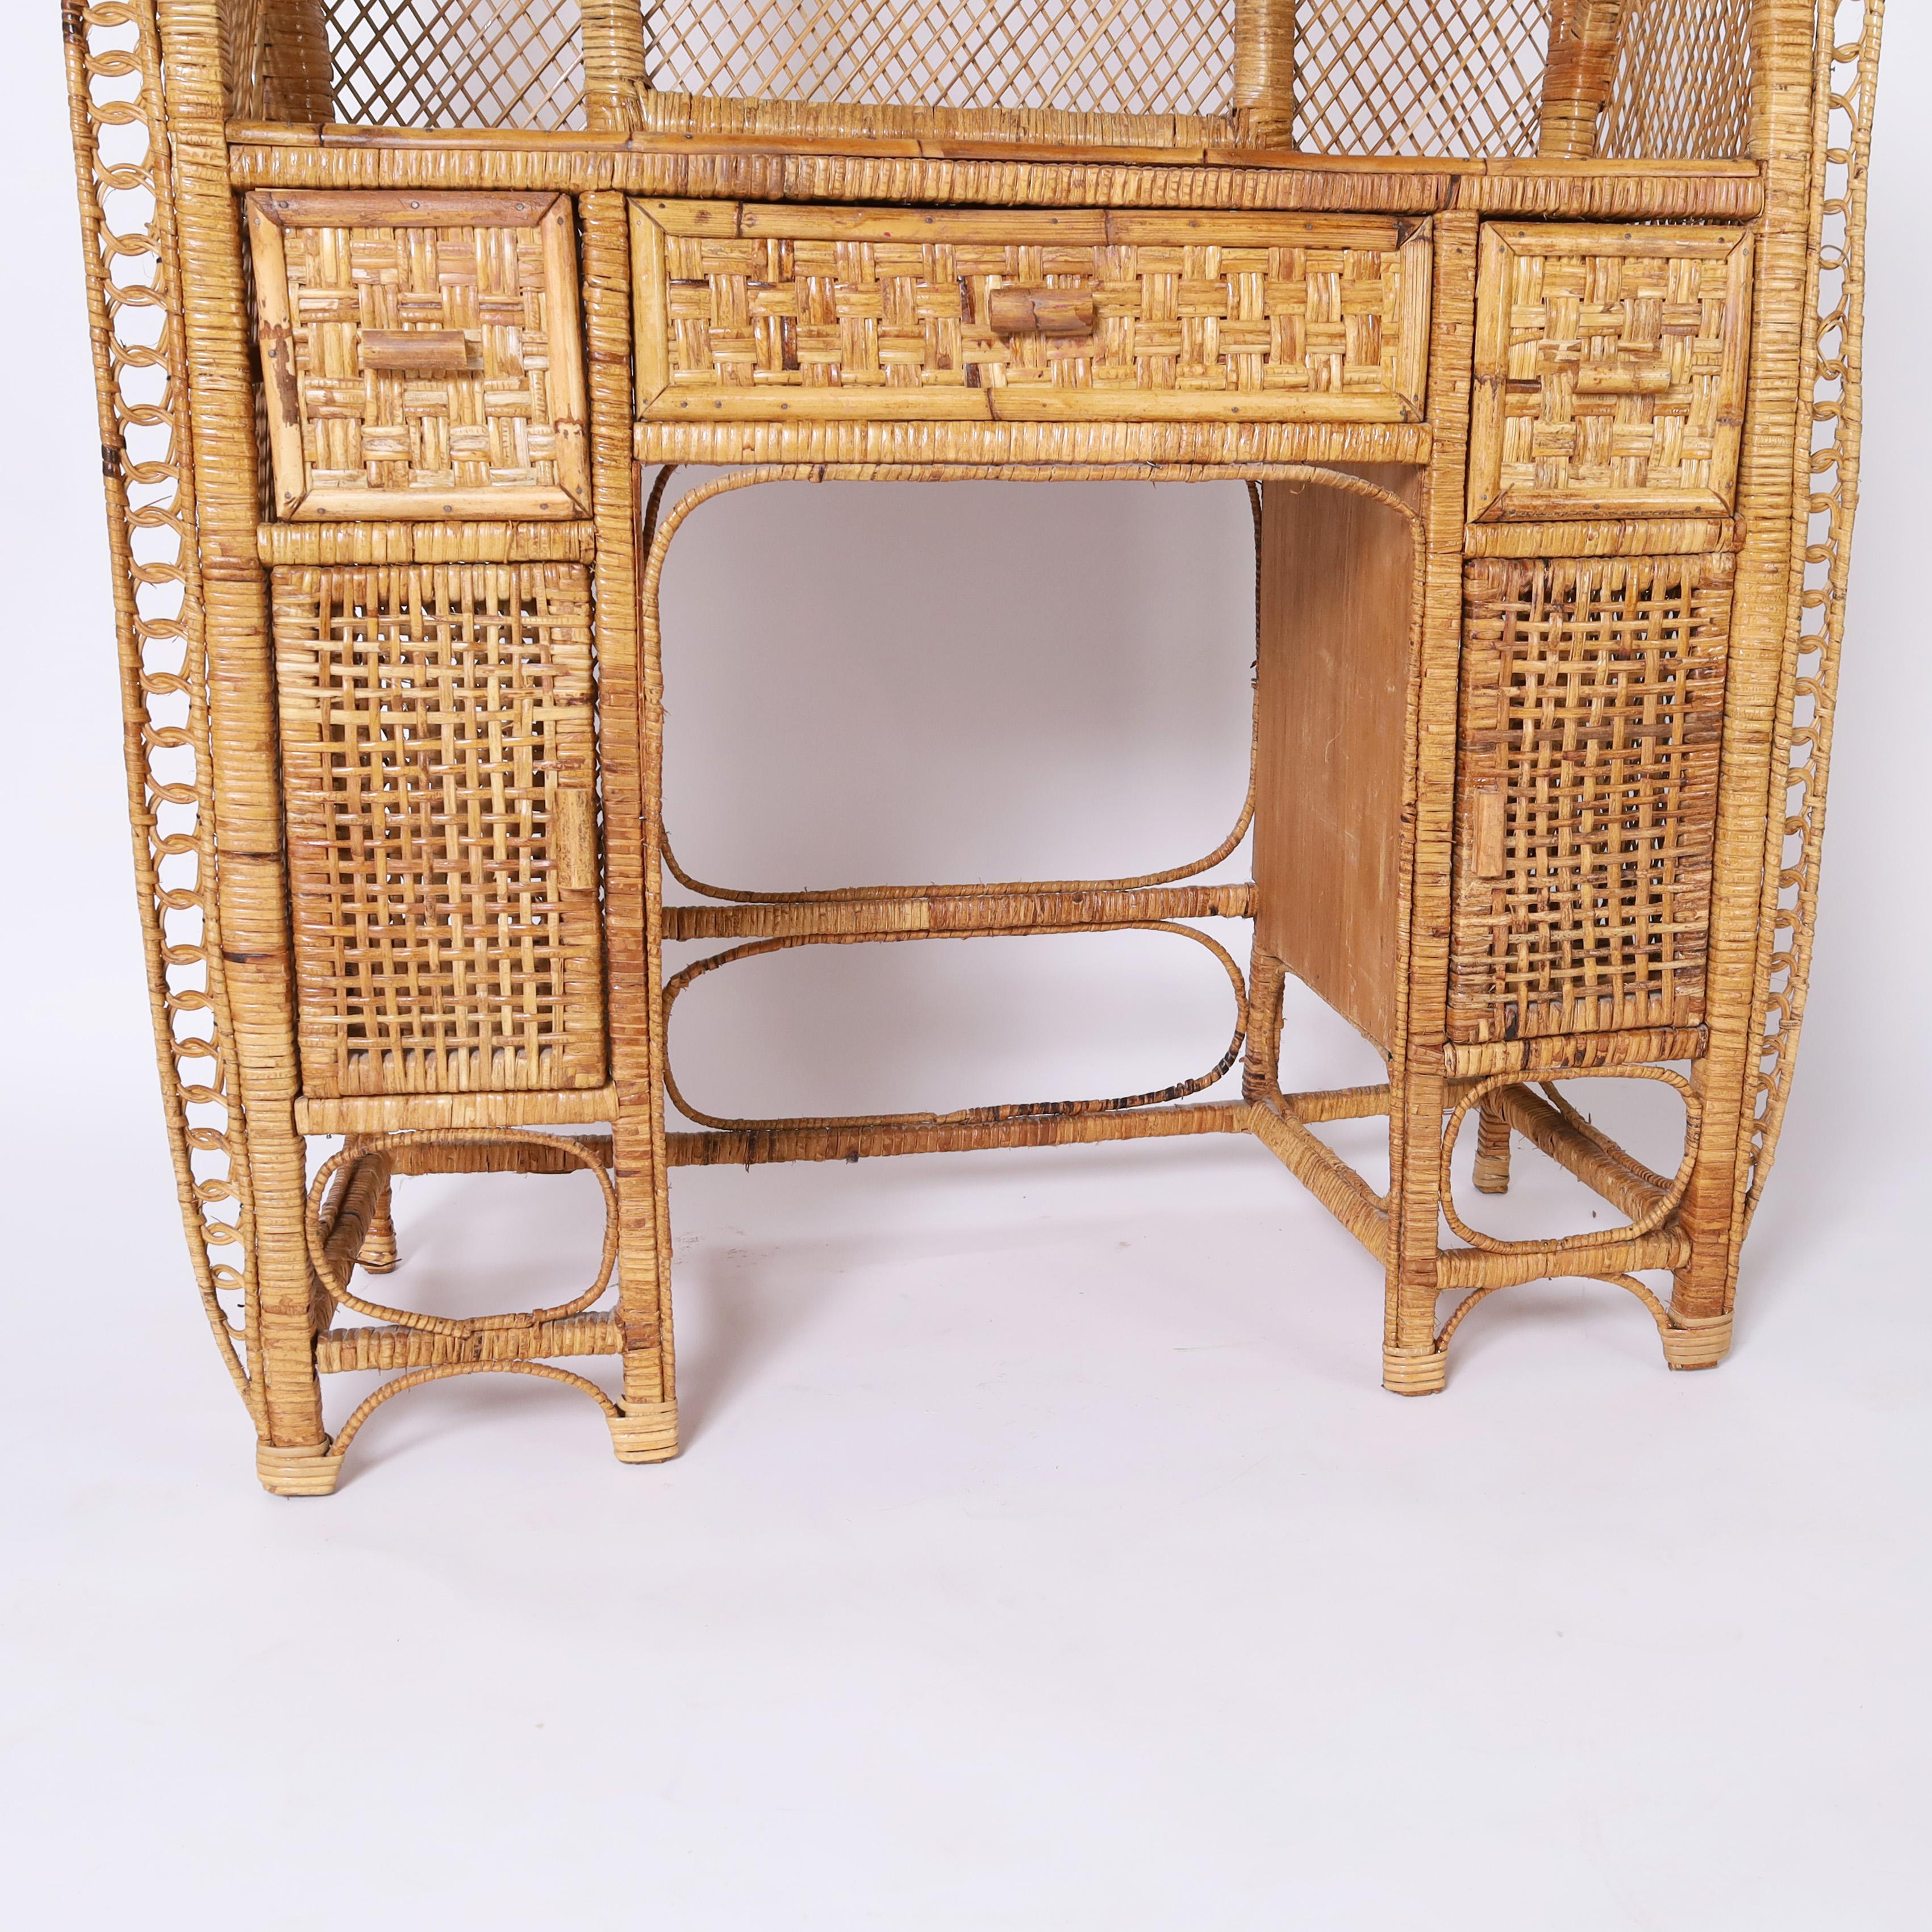 Vintage Anglo Indian Wicker and Rattan Peacock Vanity For Sale 1